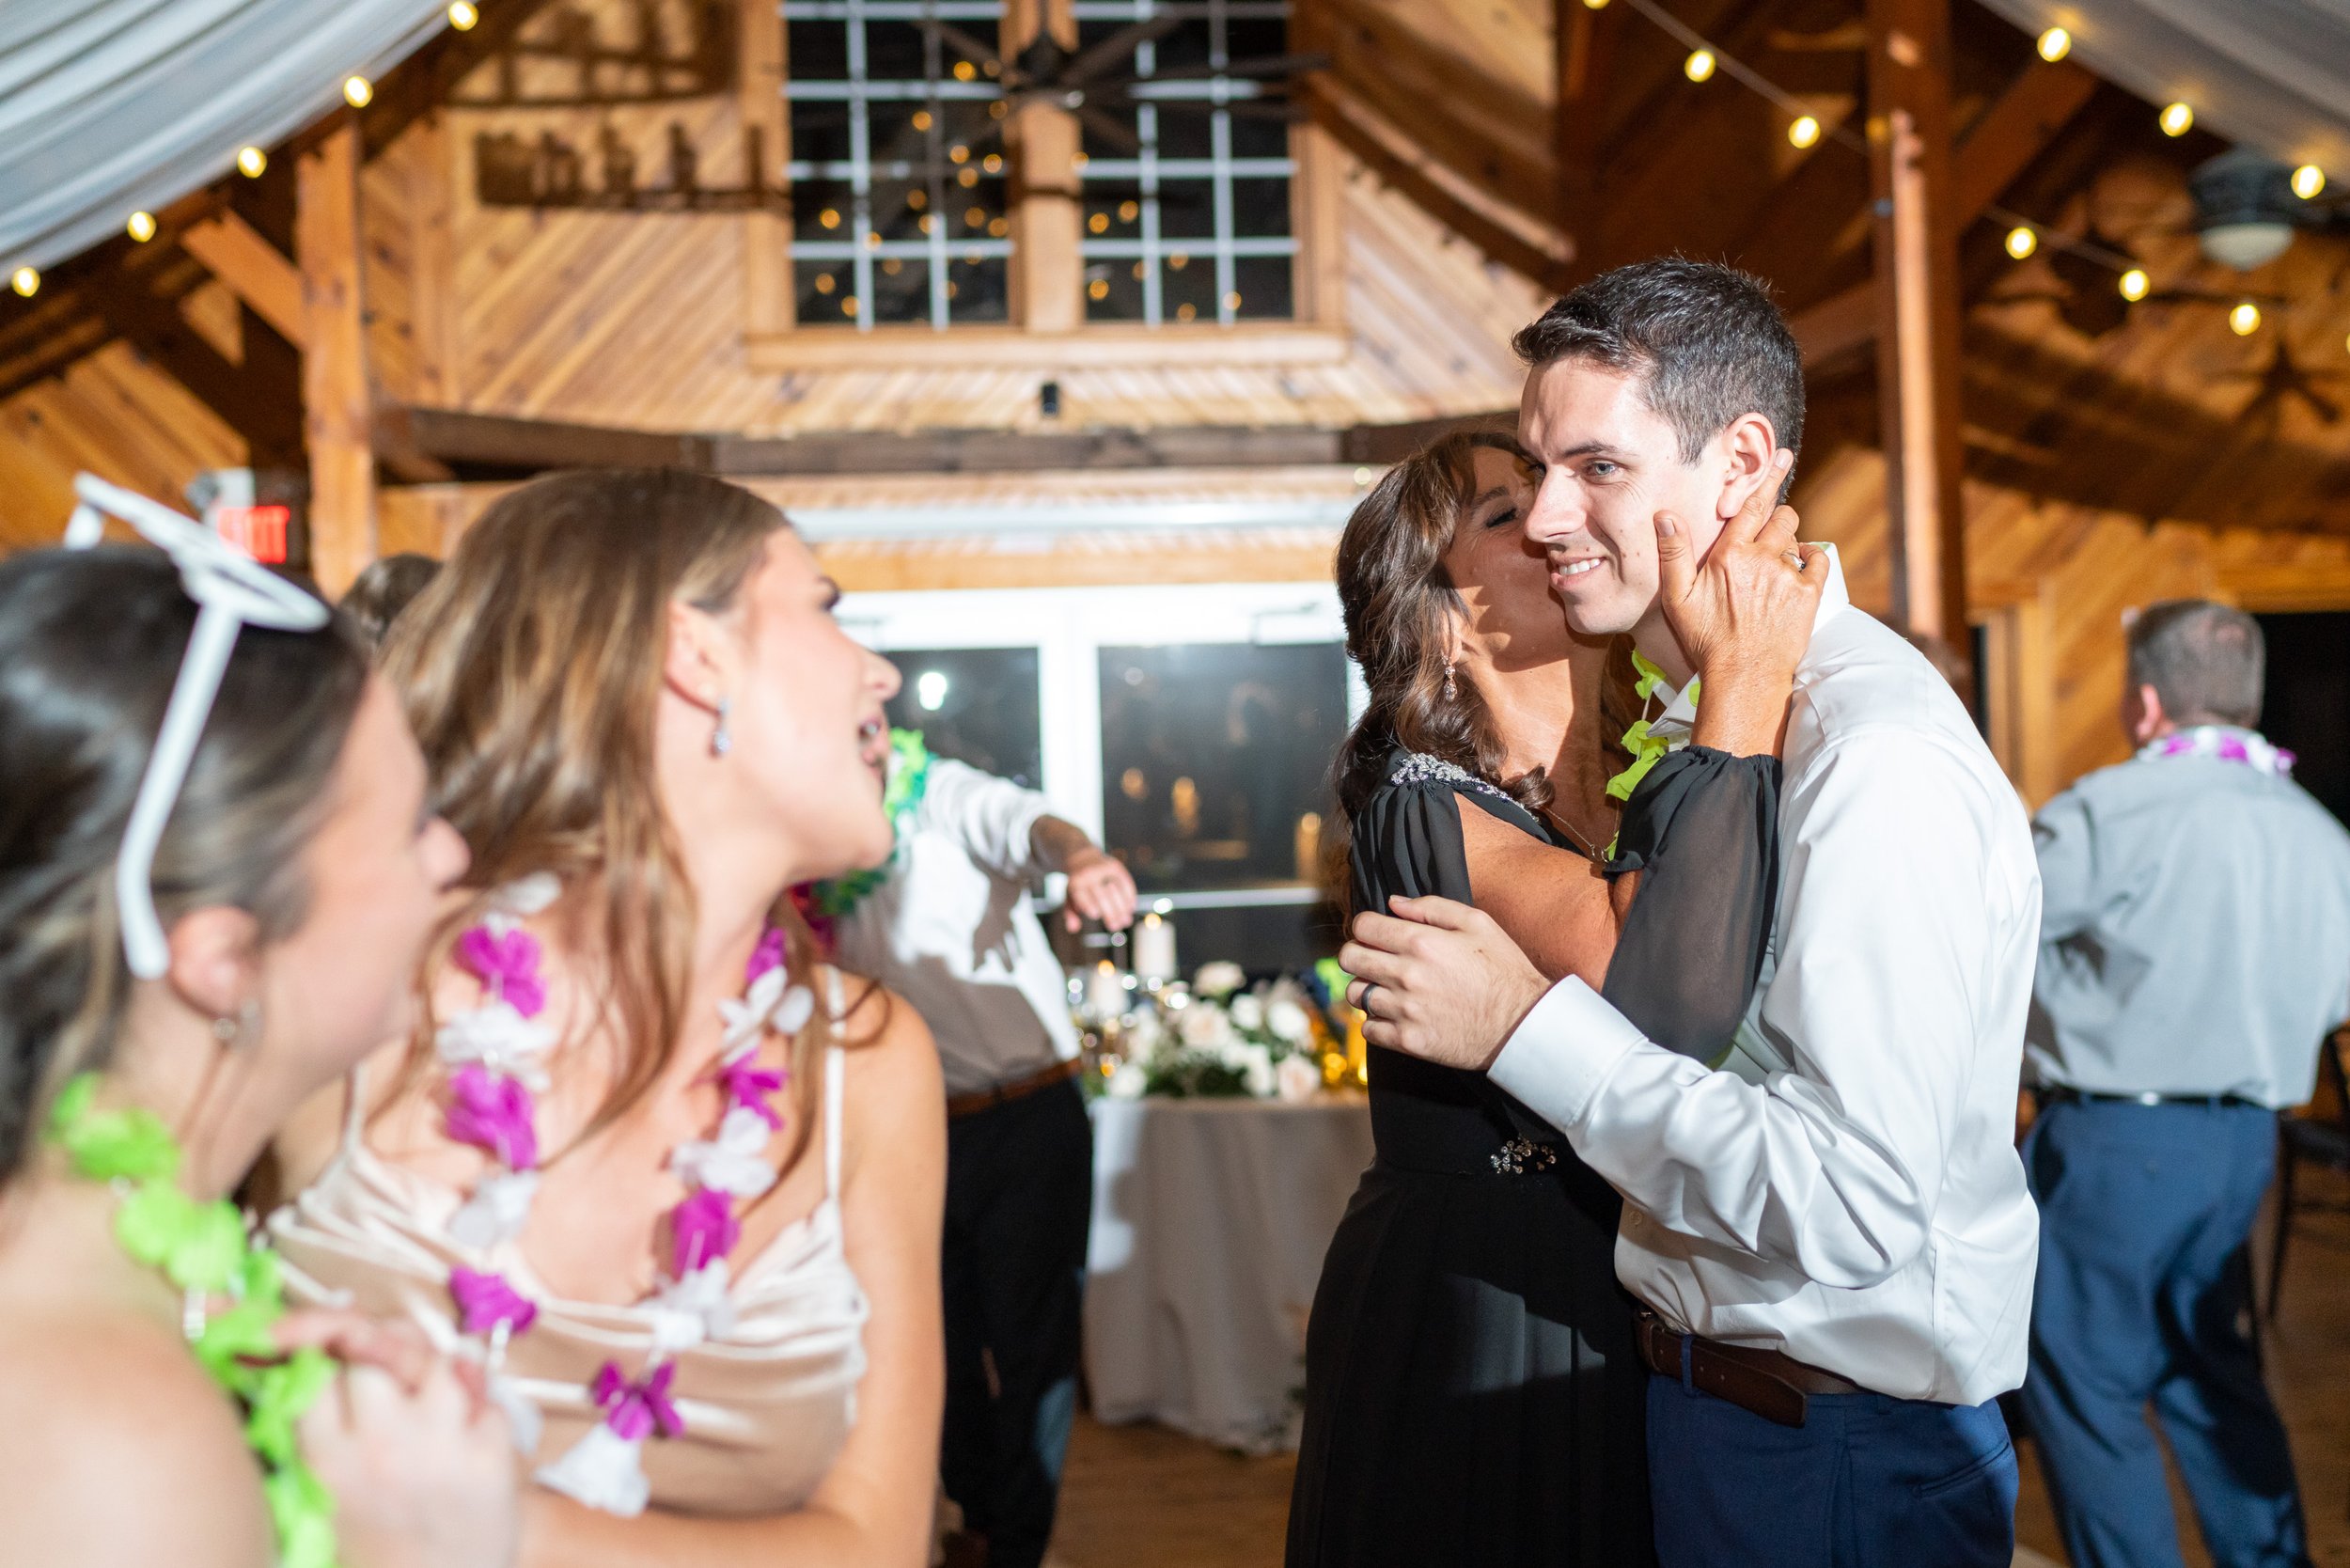 Dance floor fun wedding photography in outer banks nc